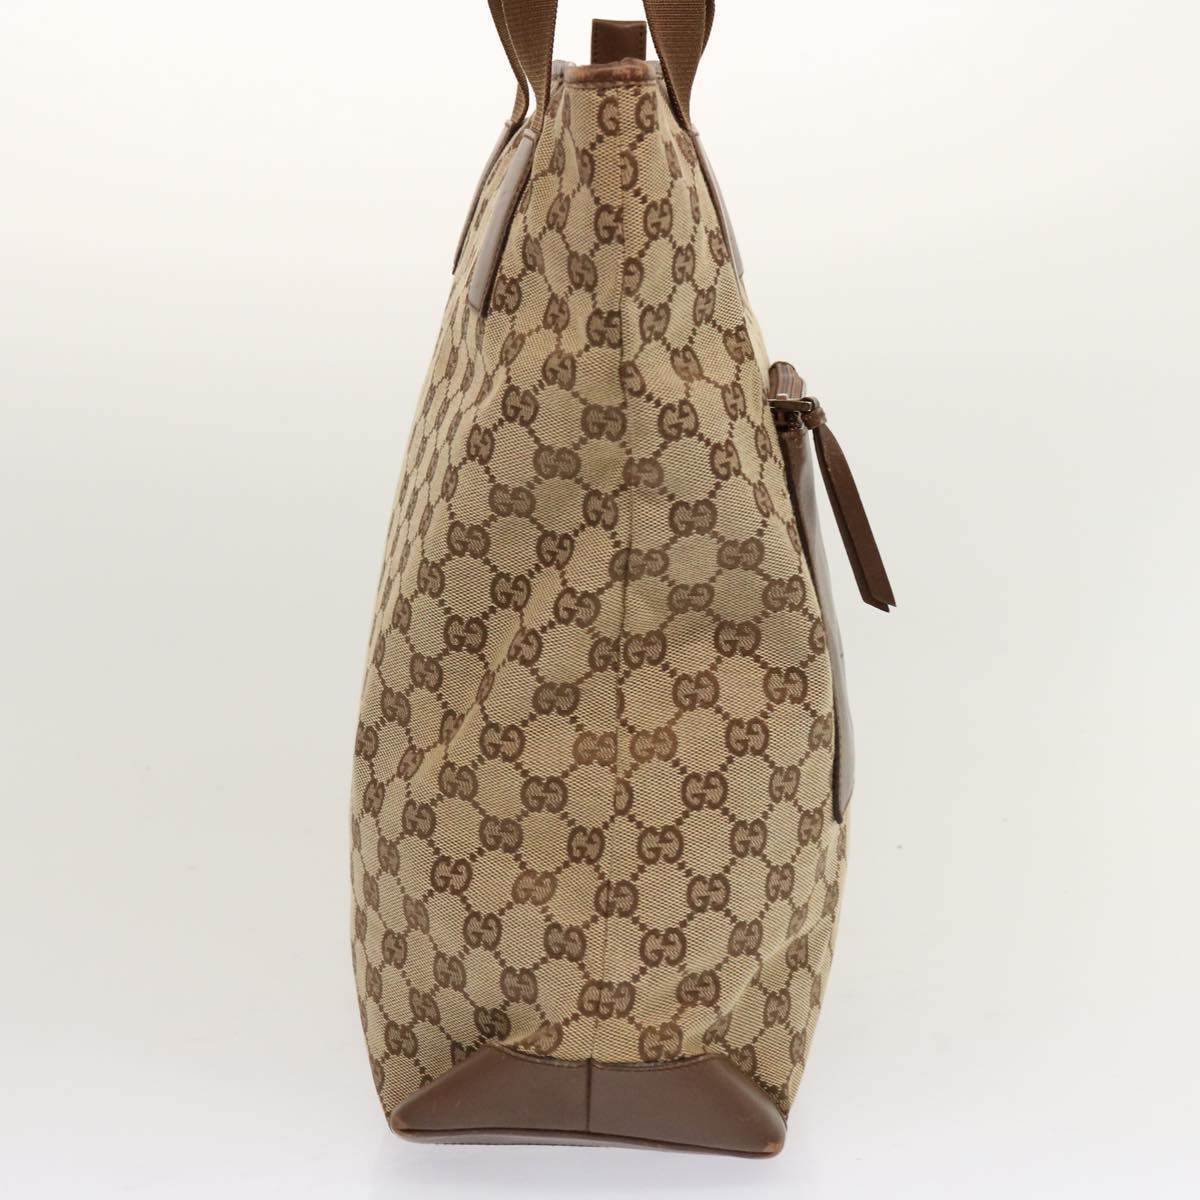 GUCCI GG Canvas Tote Bag Beige Brown 019 0401 Auth ep3771